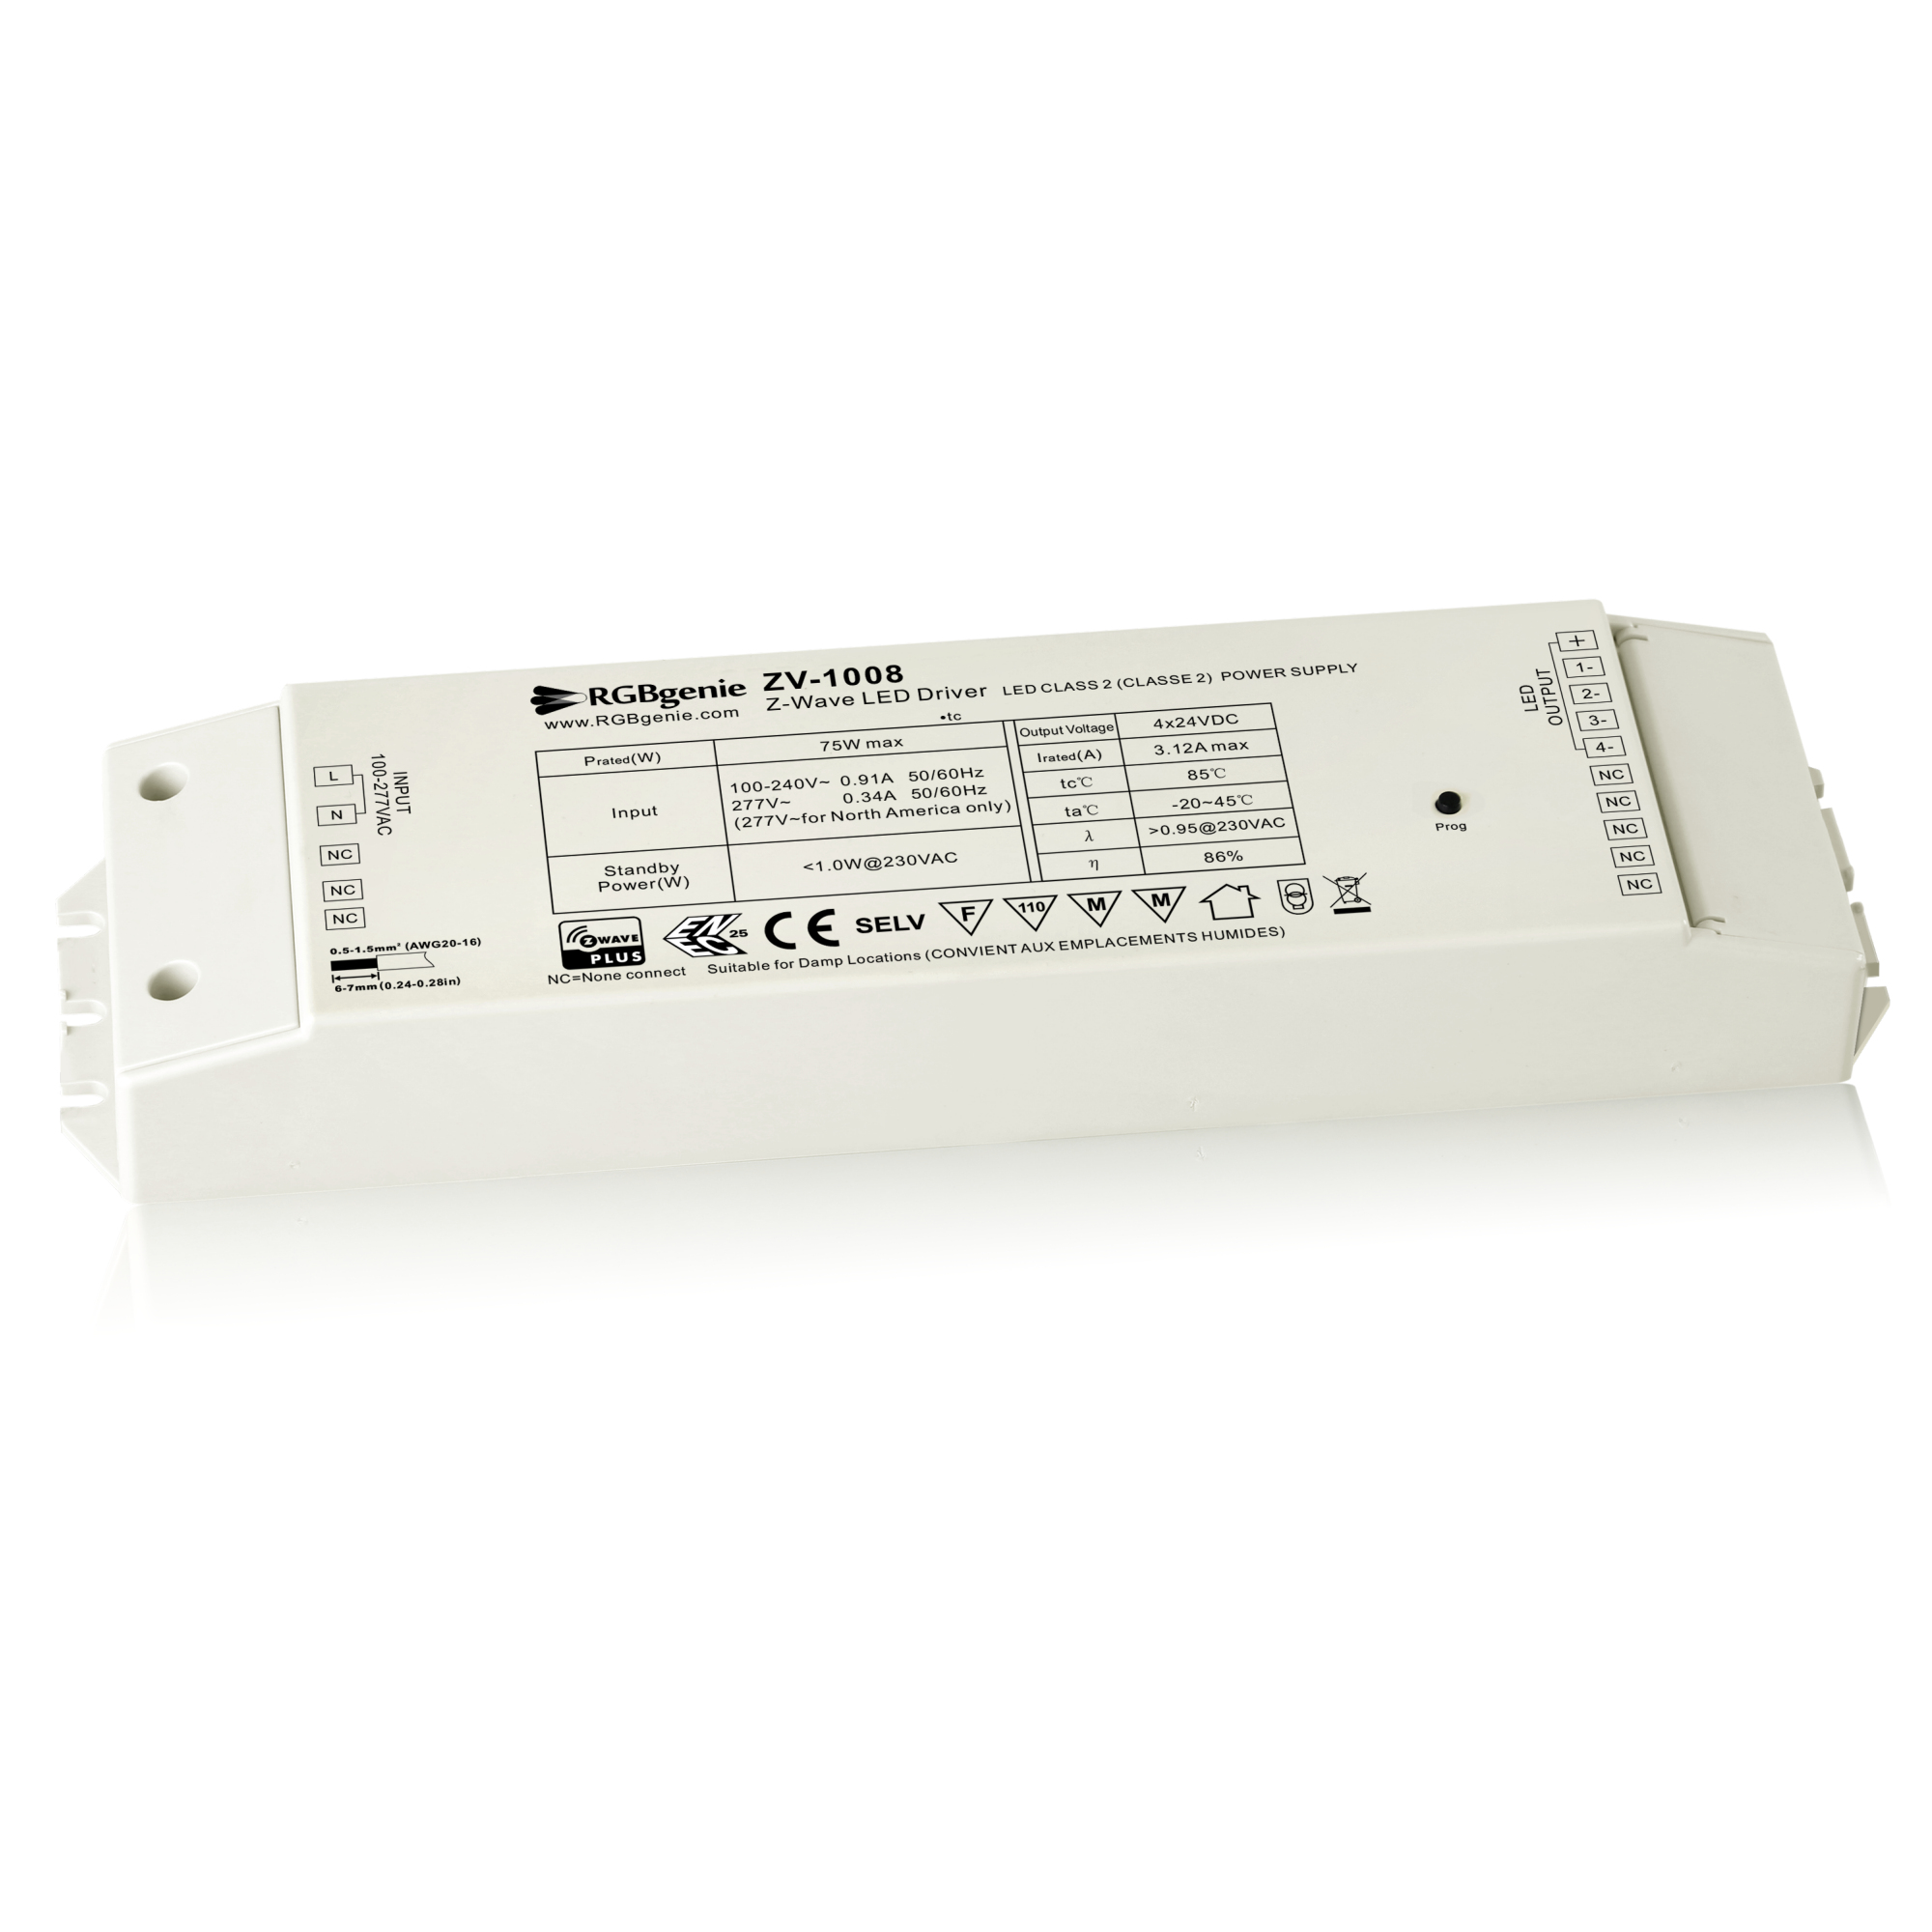 https://rgbgenie.com/wp-content/uploads/2019/01/ZV-1008-LED-dimming-driver.png